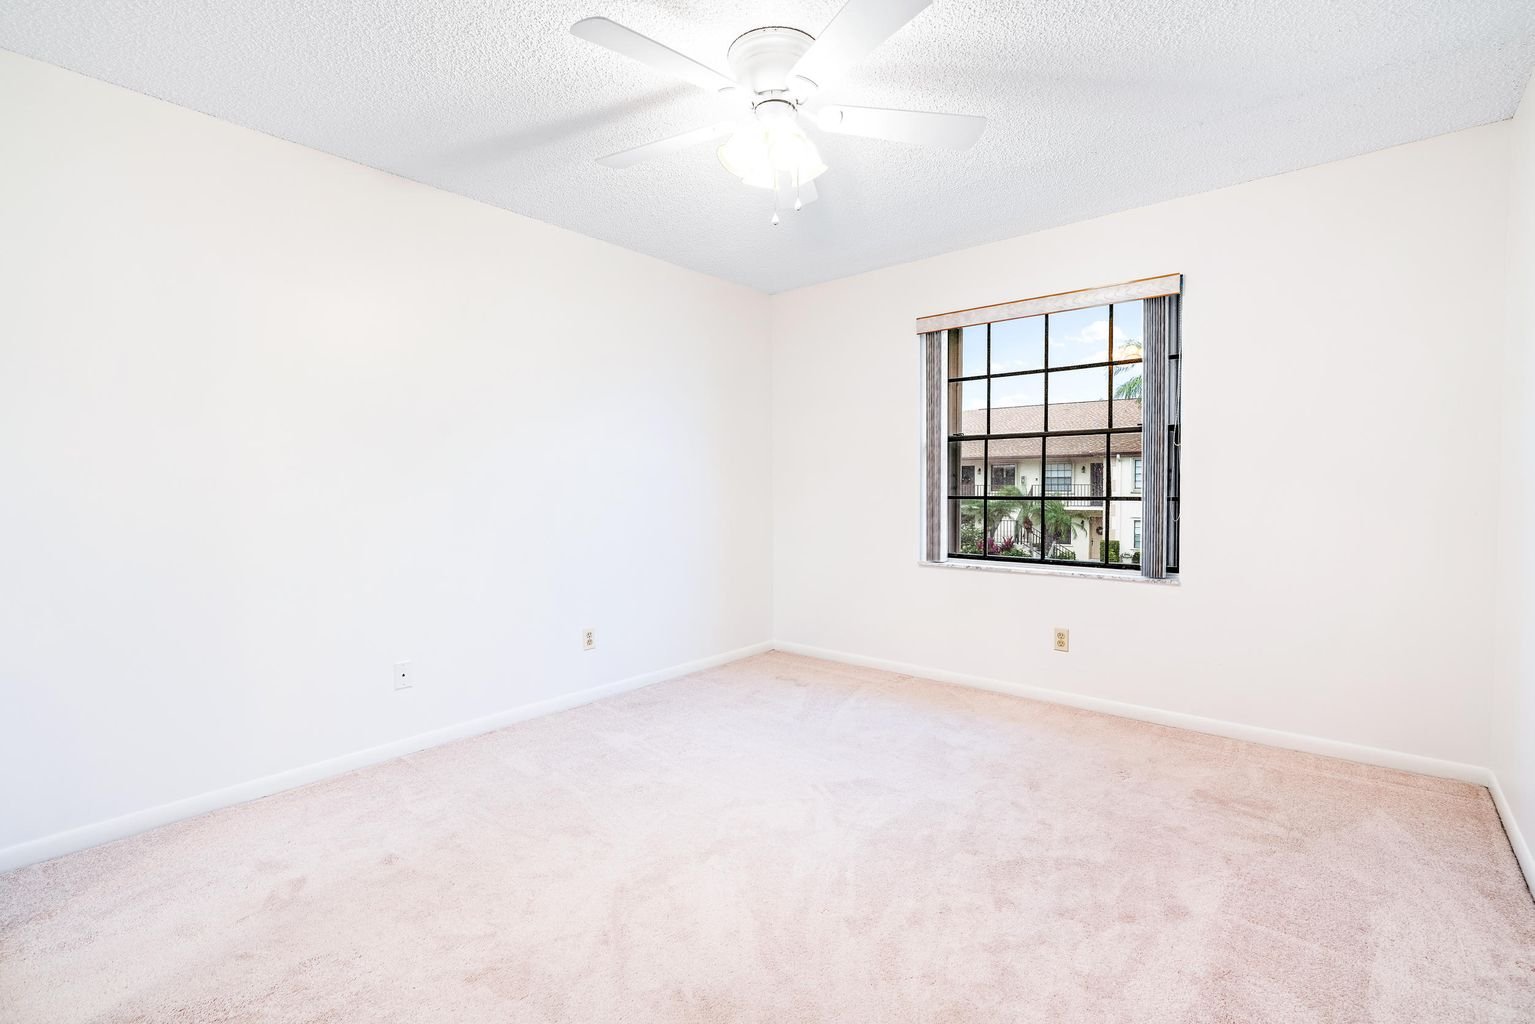 Second-story condo for rent in Jupiter